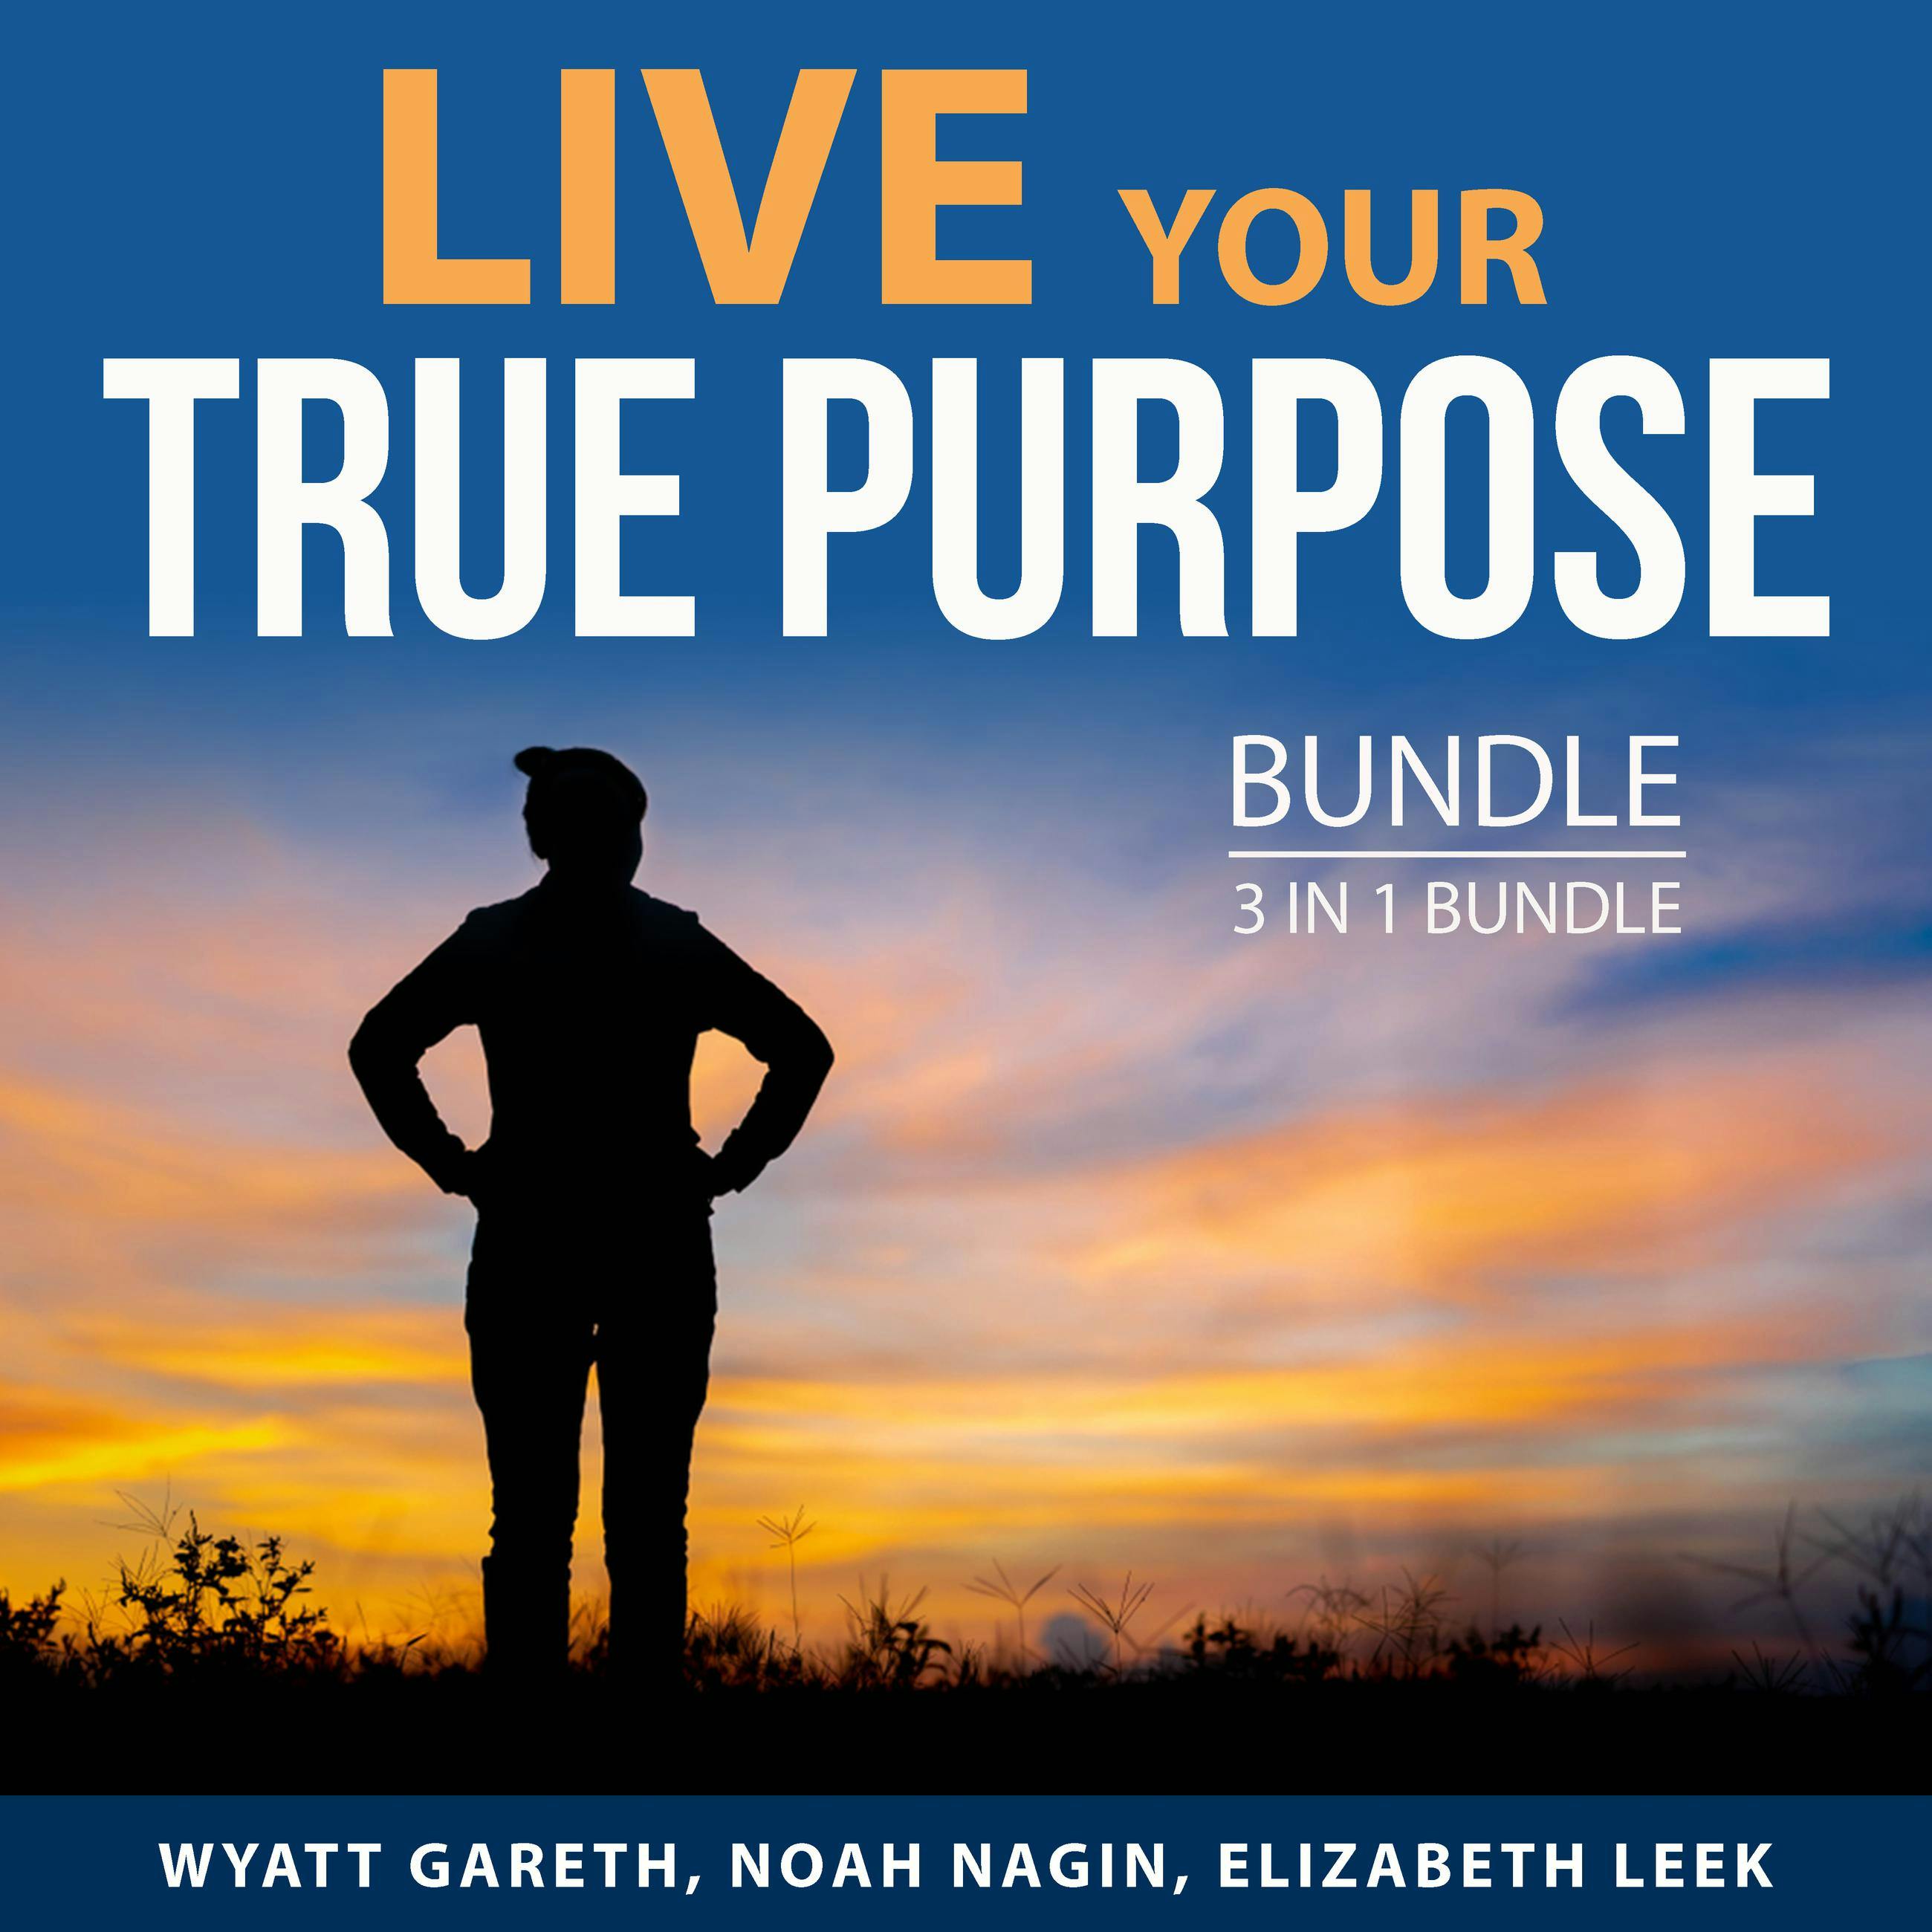 Live Your True Purpose Bundle, 3 in 1 Bundle: Purposeful Life, Living a Meaningful Life, and Positive Outlook - undefined